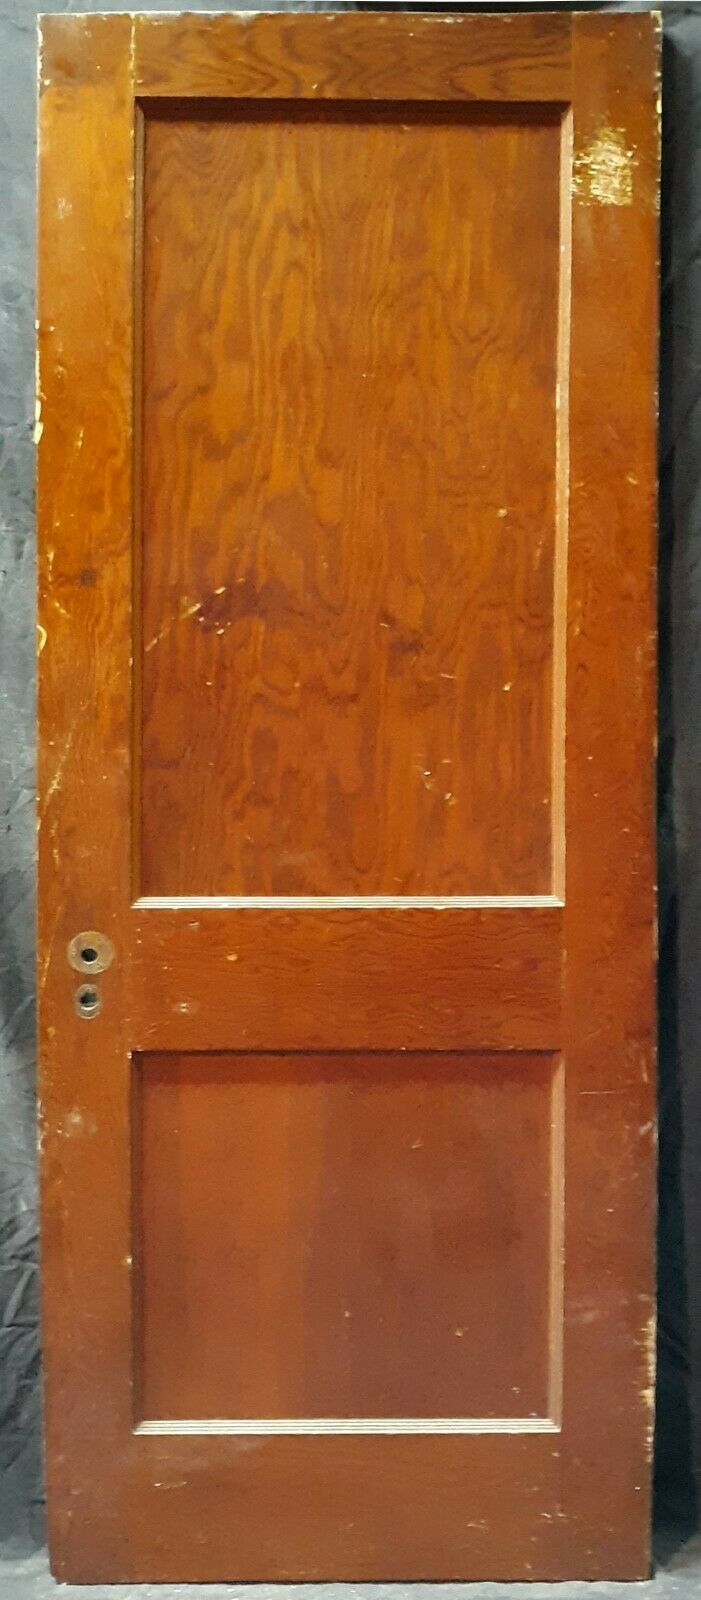 28"x77" Antique Vintage Old Reclaimed Salvaged Interior SOLID Wood Wooden Closet Pantry Door Panels